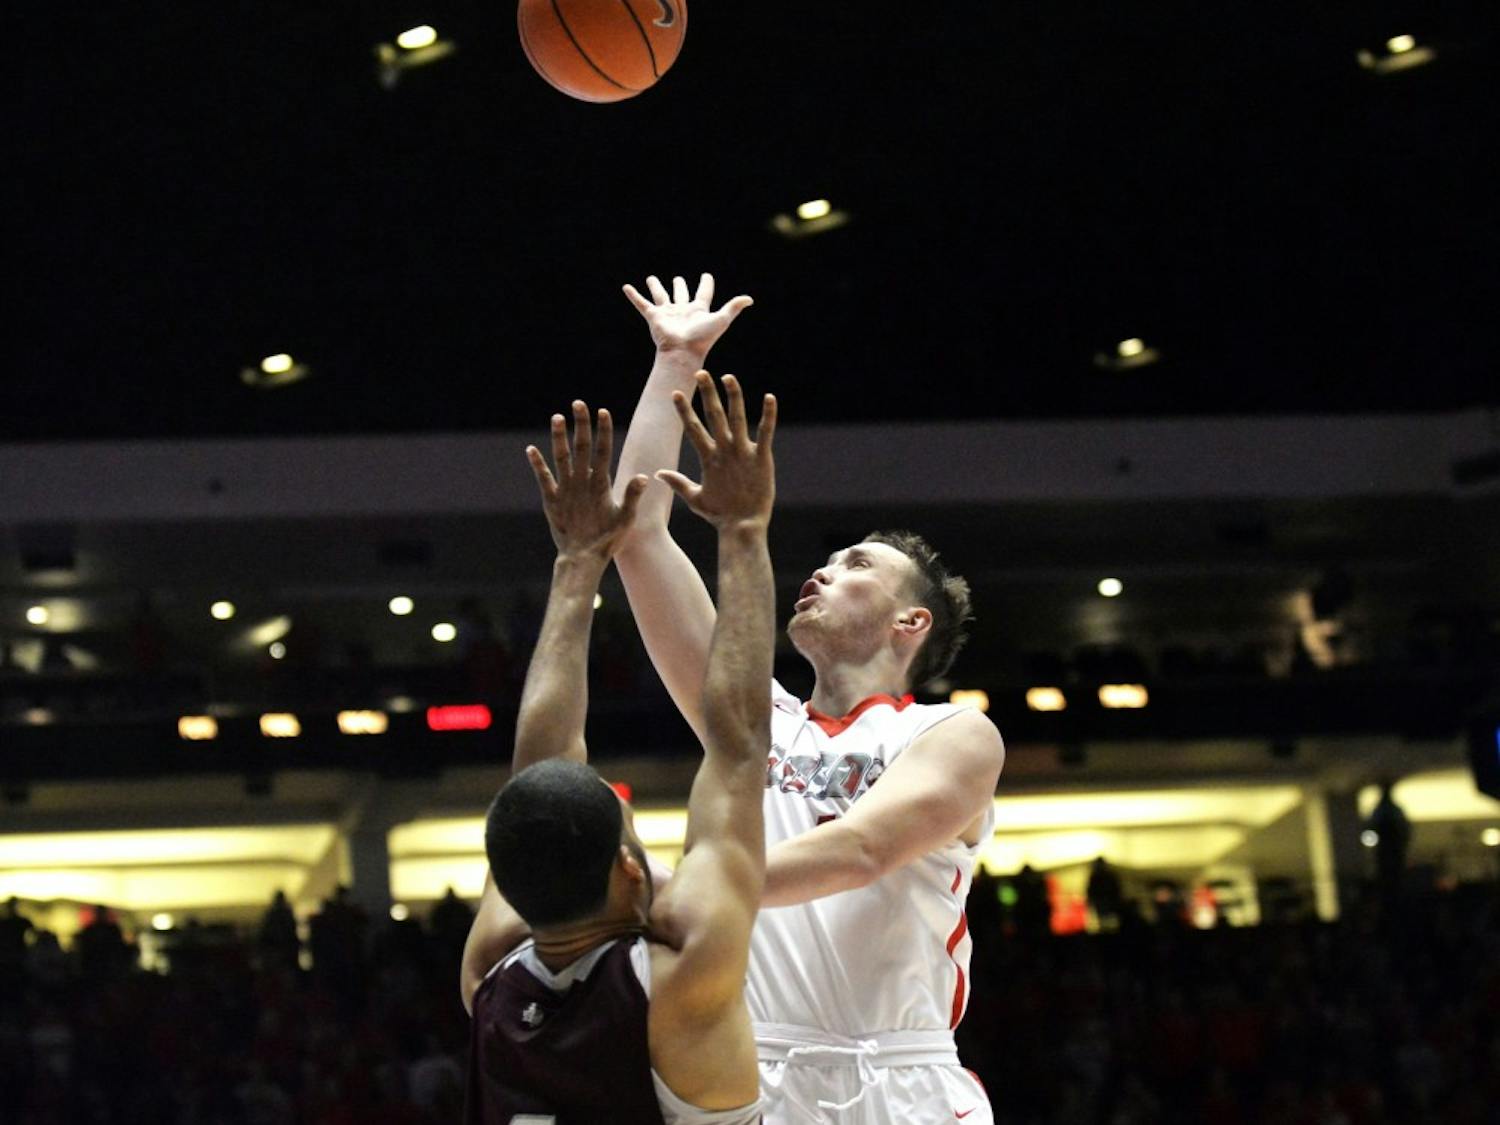 Redshirt sophomore guard Cullen Neal leaps past Texas Southerns Jose Rodriguez at WisePies Arena Friday nights. The Lobos beat out the Tigers 86-57 and play NMSU this Sunday in Las Cruces, NM.&nbsp;